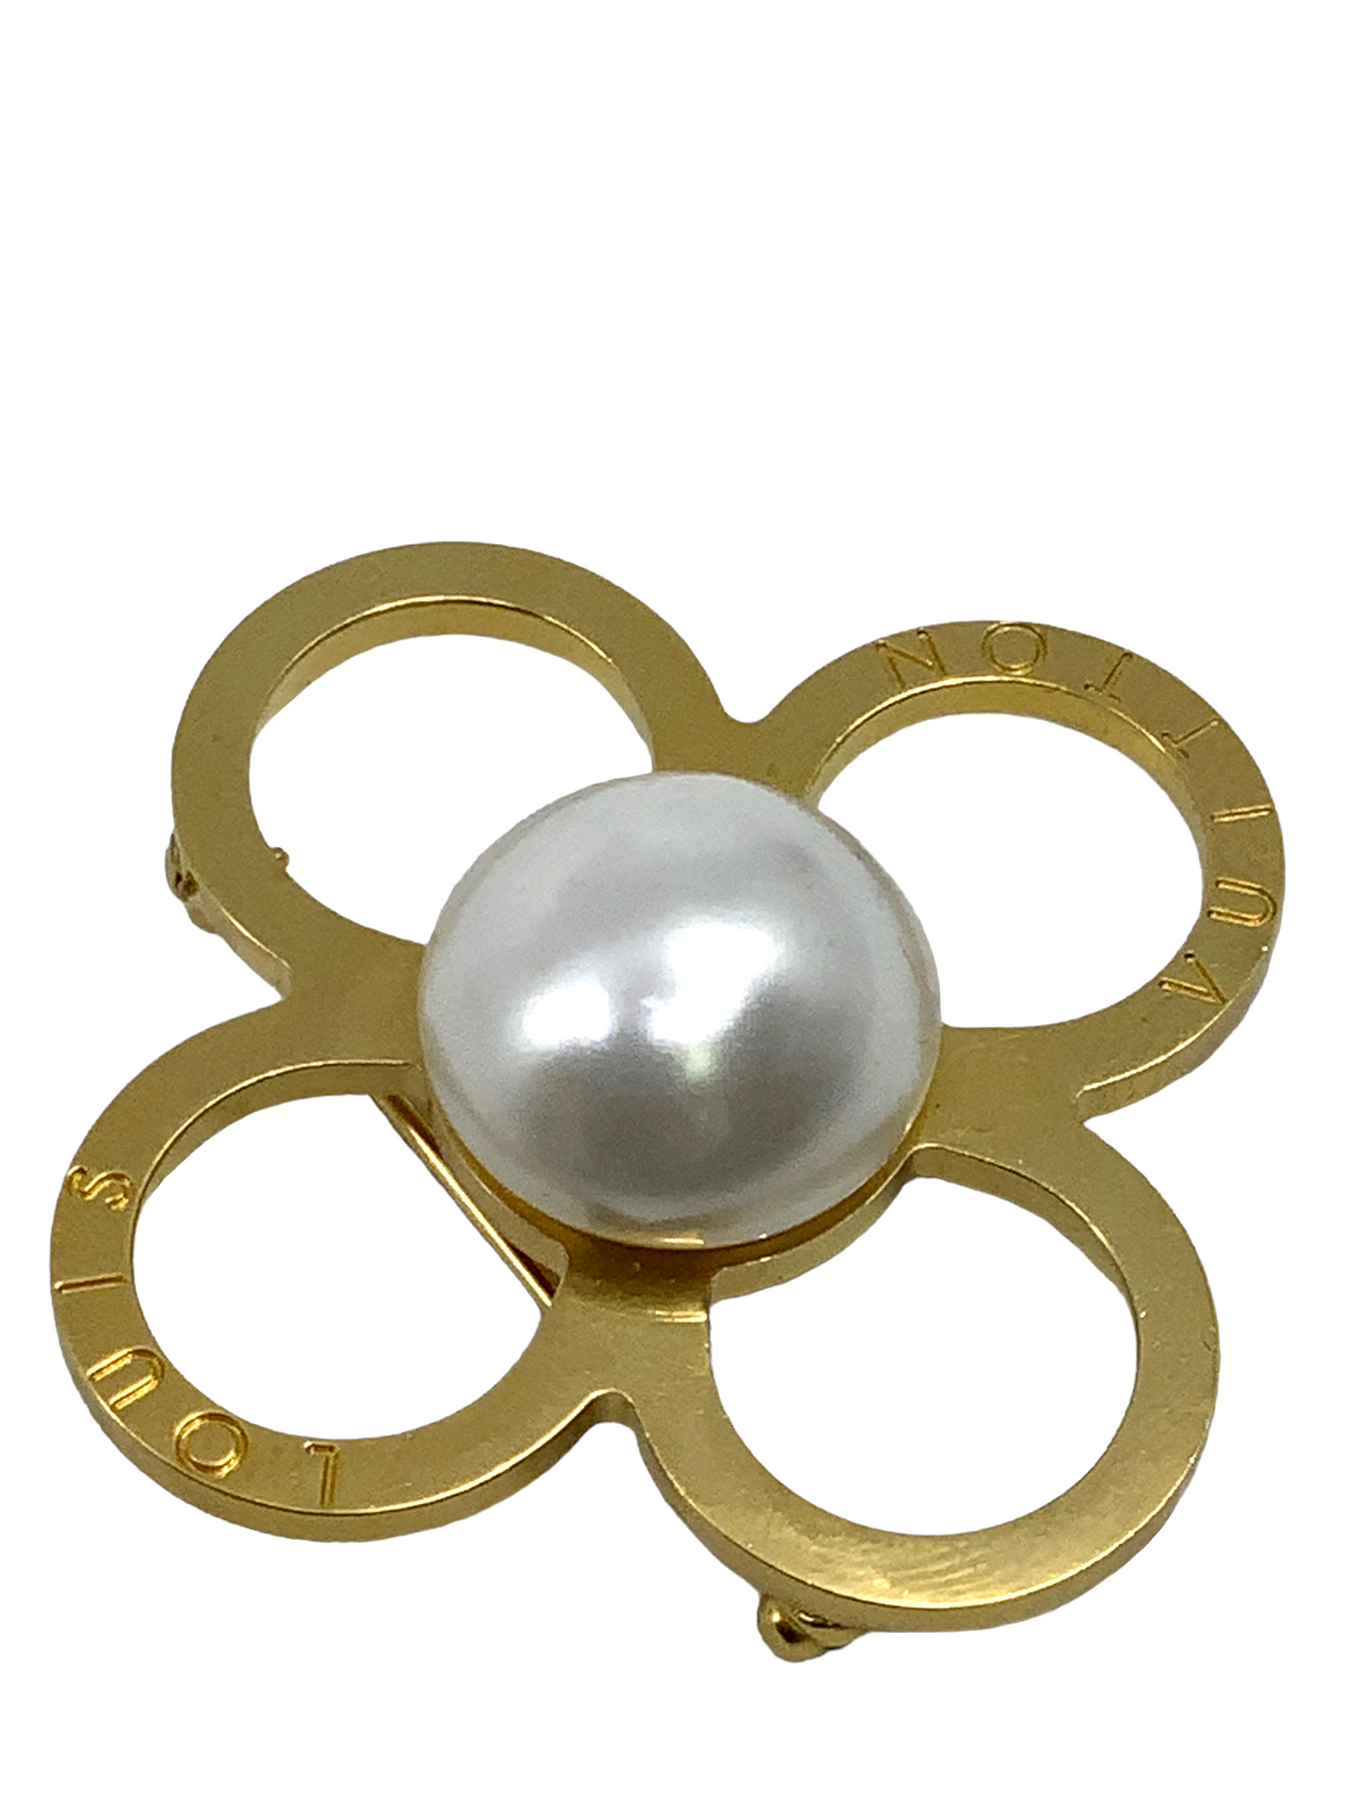 LOUIS VUITTON Monogram Flower Pearl Brooch Pin - Consigned Designs